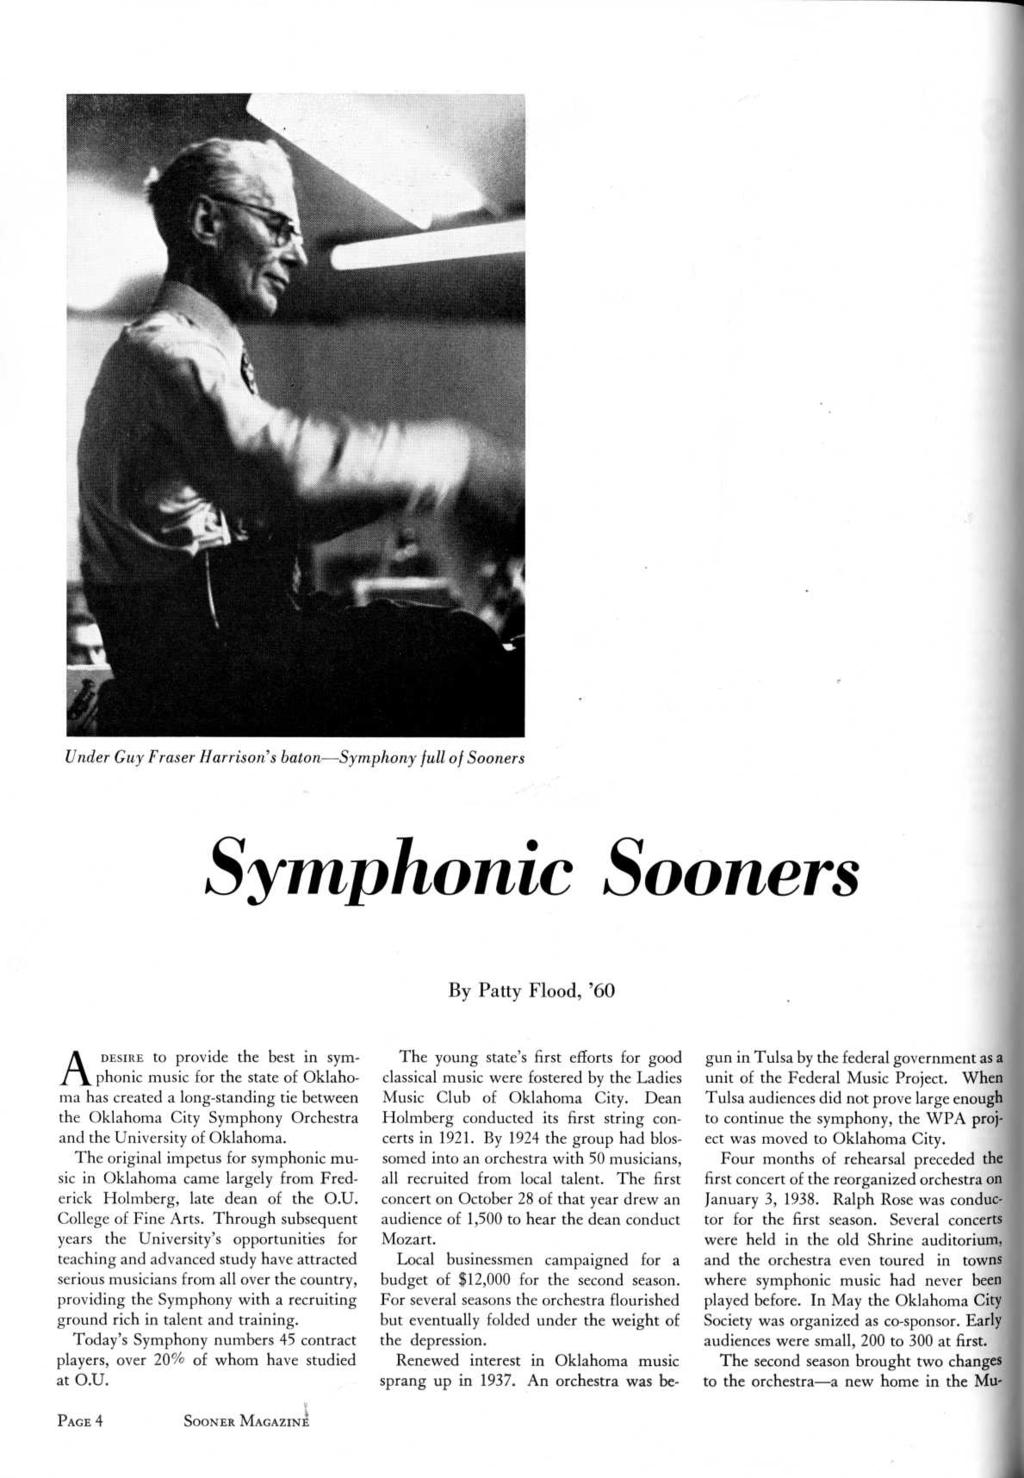 Under Guy Fraser Harrison's baton-symphony full o f Sooners Symphonic Sooners By Patty Flood, '60 A DESIRE to provide the best in symphonic music for the state of Oklahoma has created a long-standing